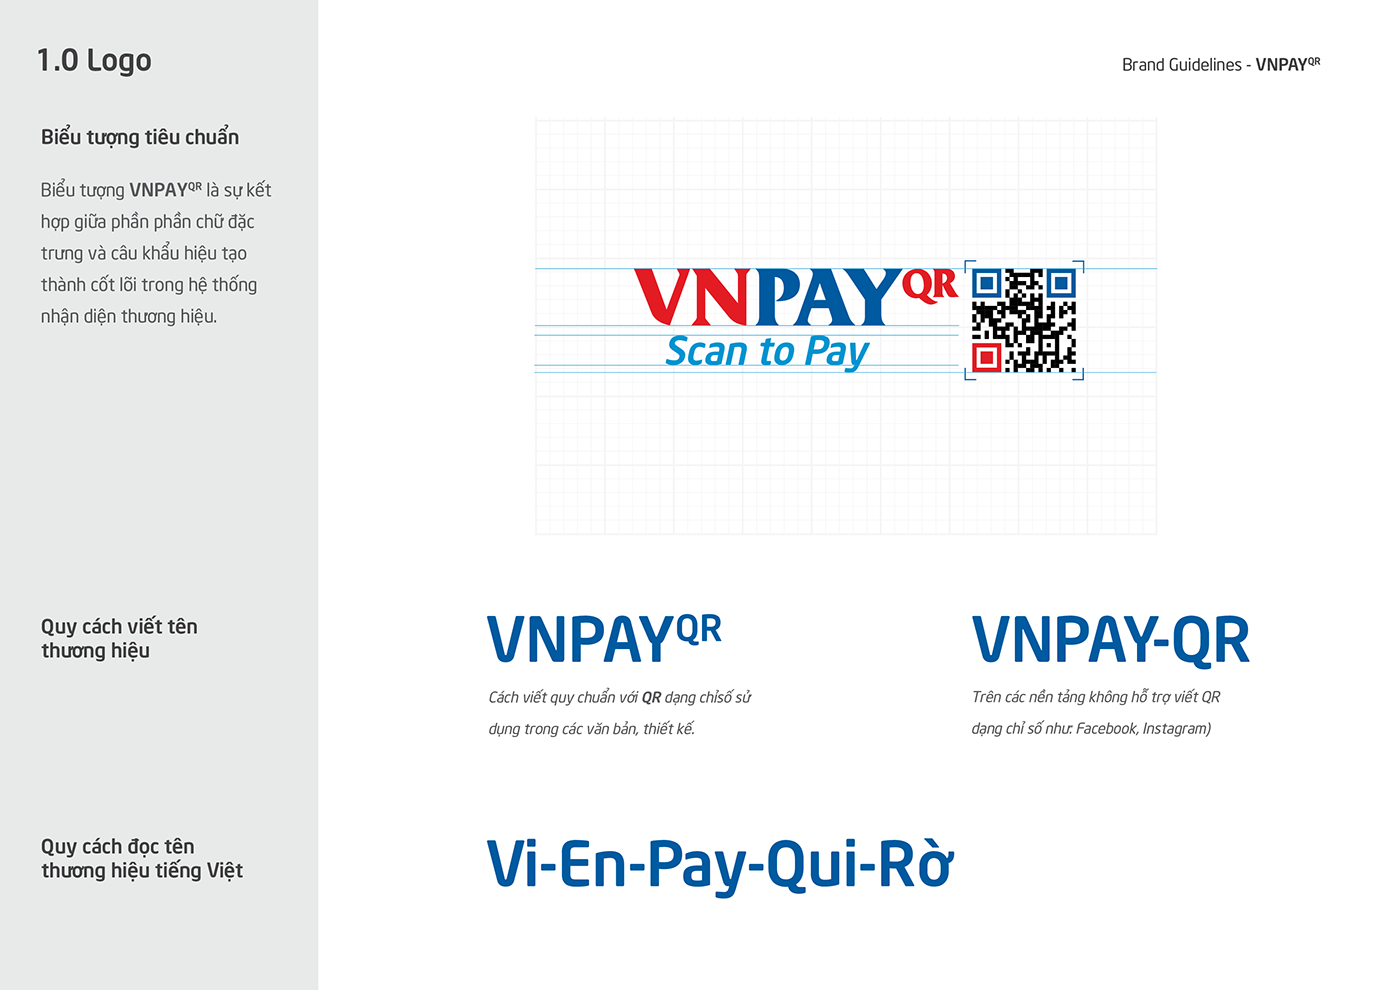 digital payment QR Code scan to pay